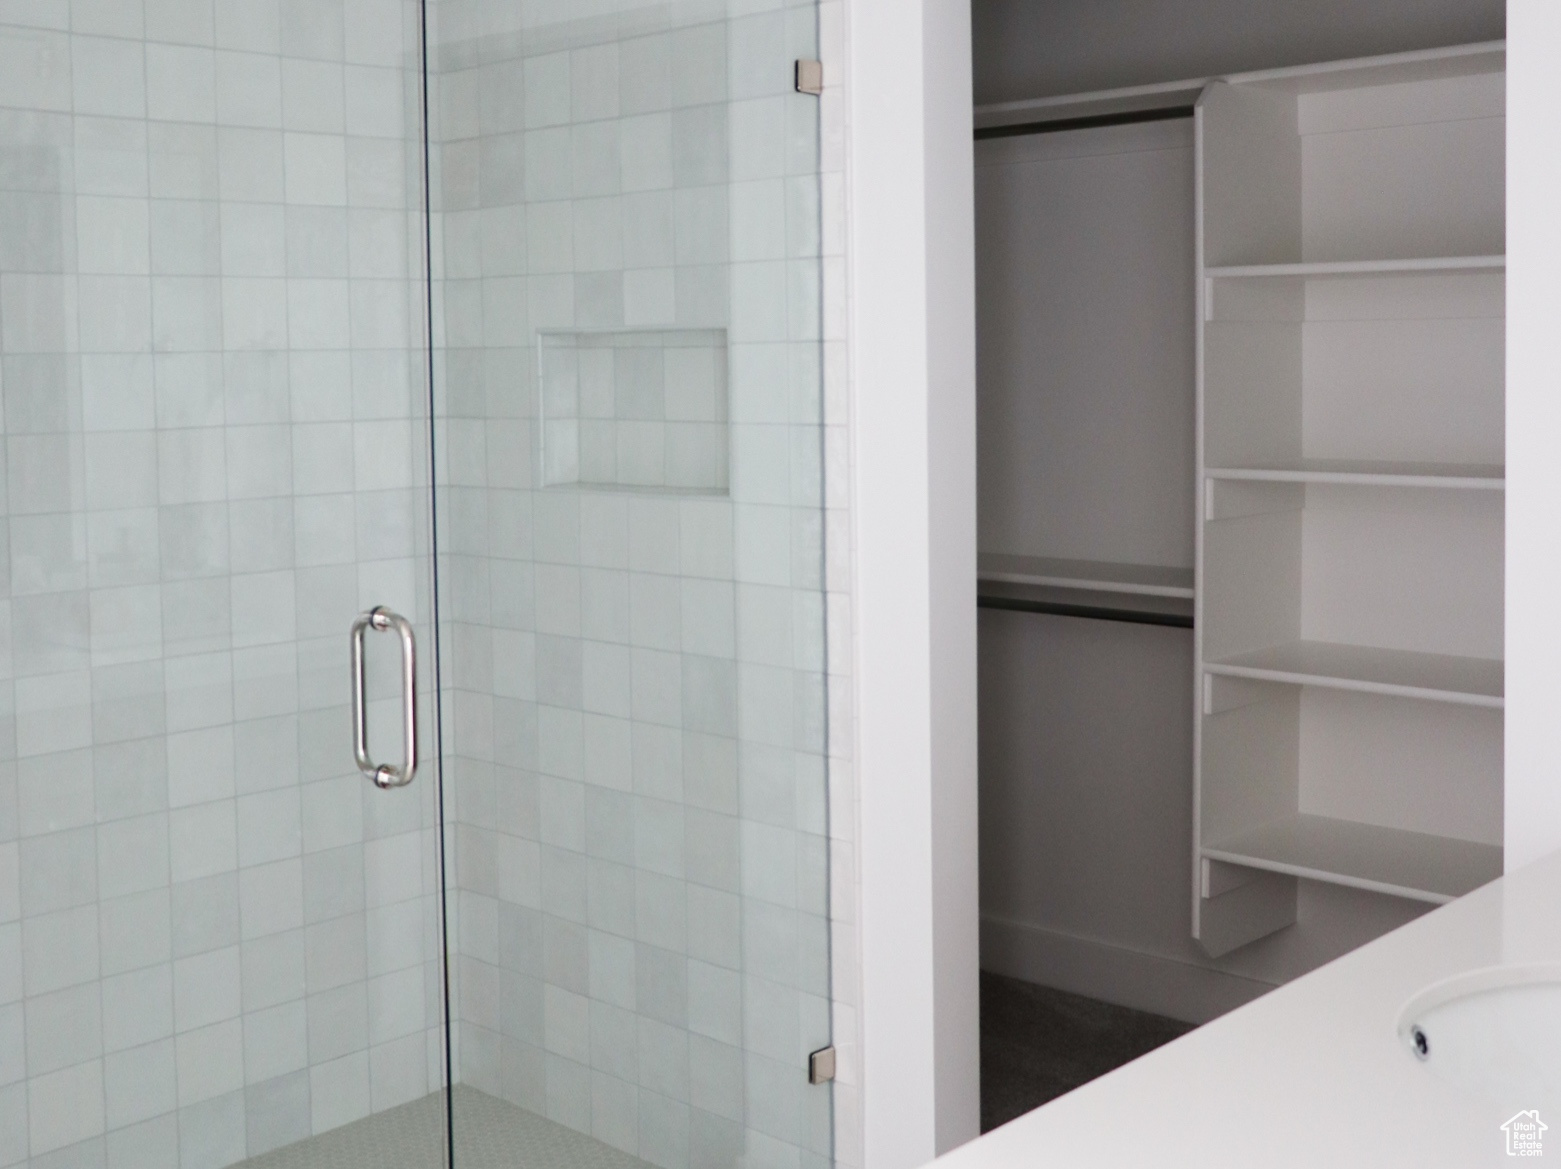 Primary Shower and walk in closet